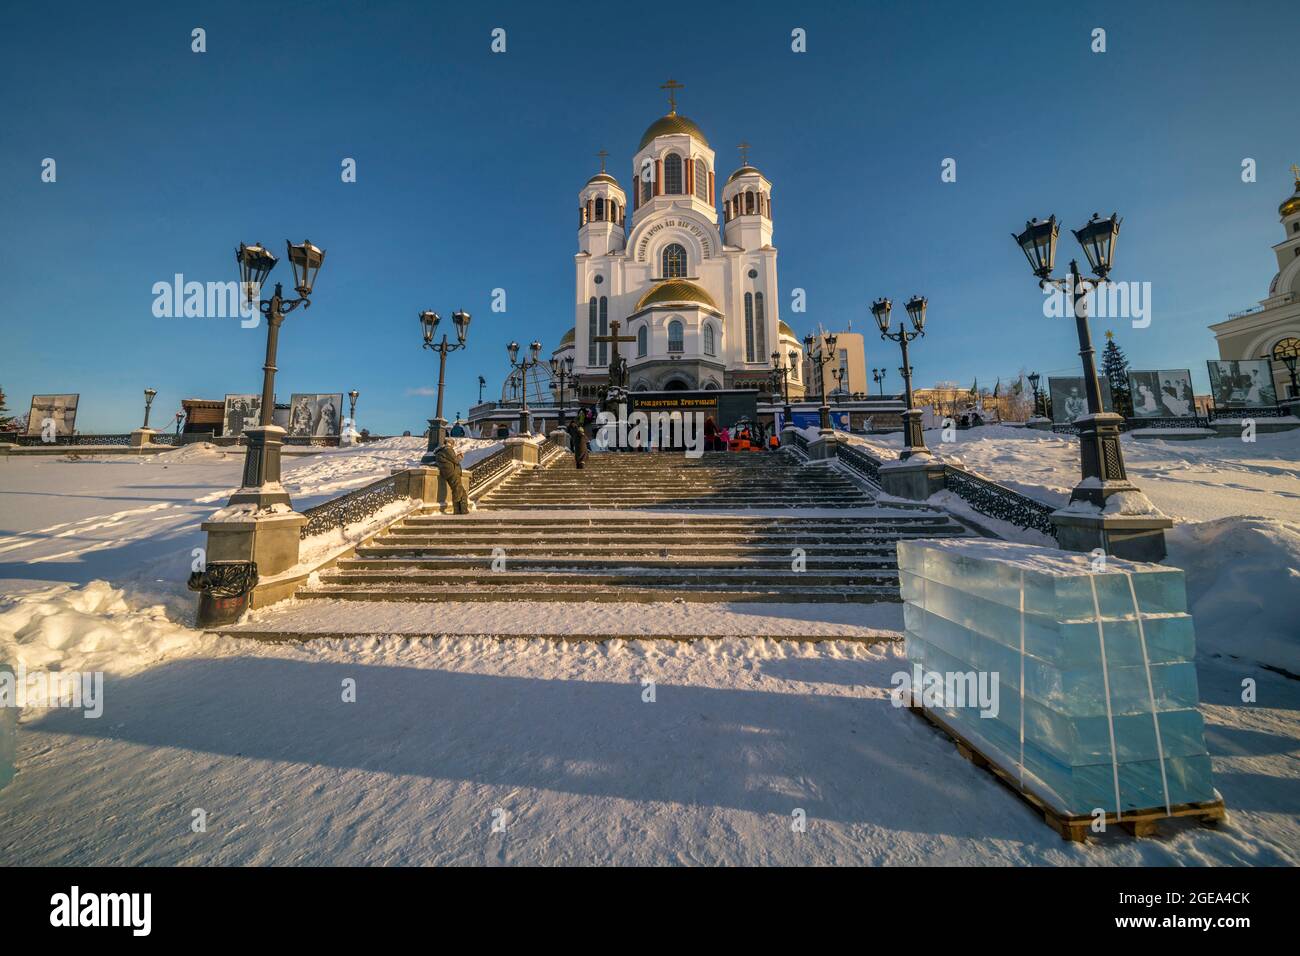 Blocks of ice await artists who will carve them into elaborate sculptures near the All Saints Cathedral in Ekaterinburg in Russia. Stock Photo